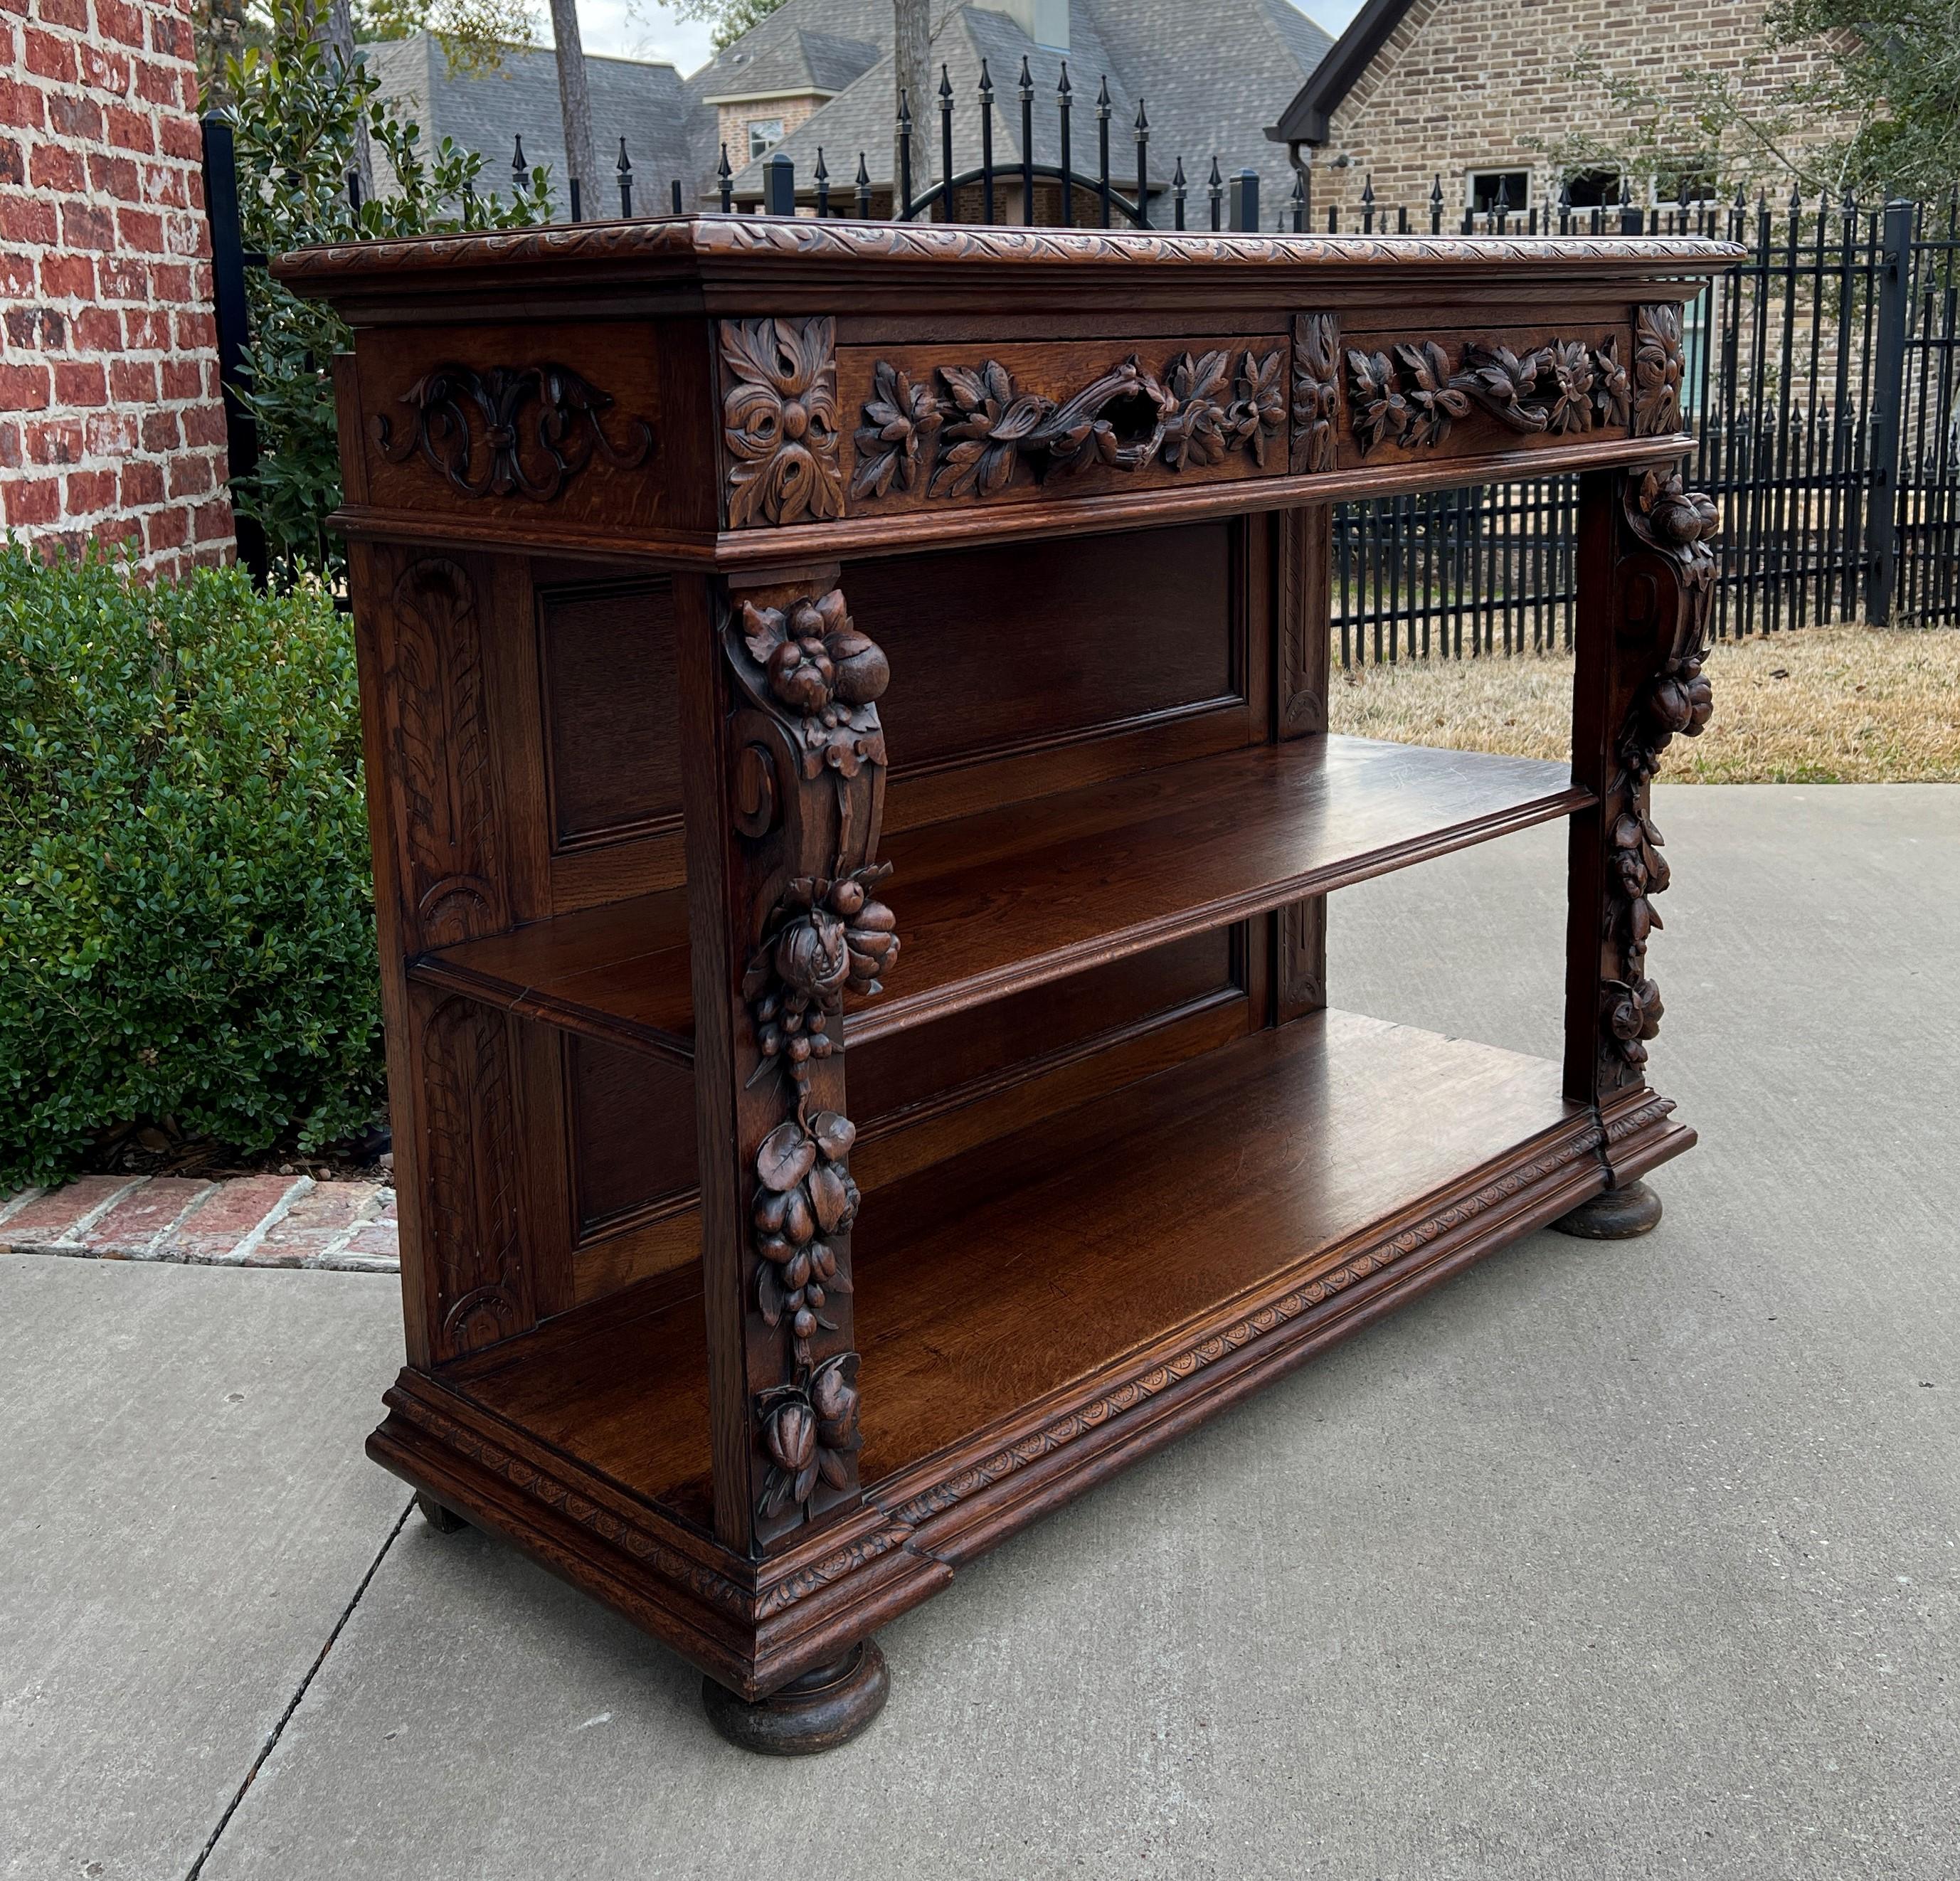 19th Century Antique French Server Sideboard Console Sofa Table 3-Tier Drawers Carved Oak 19c For Sale